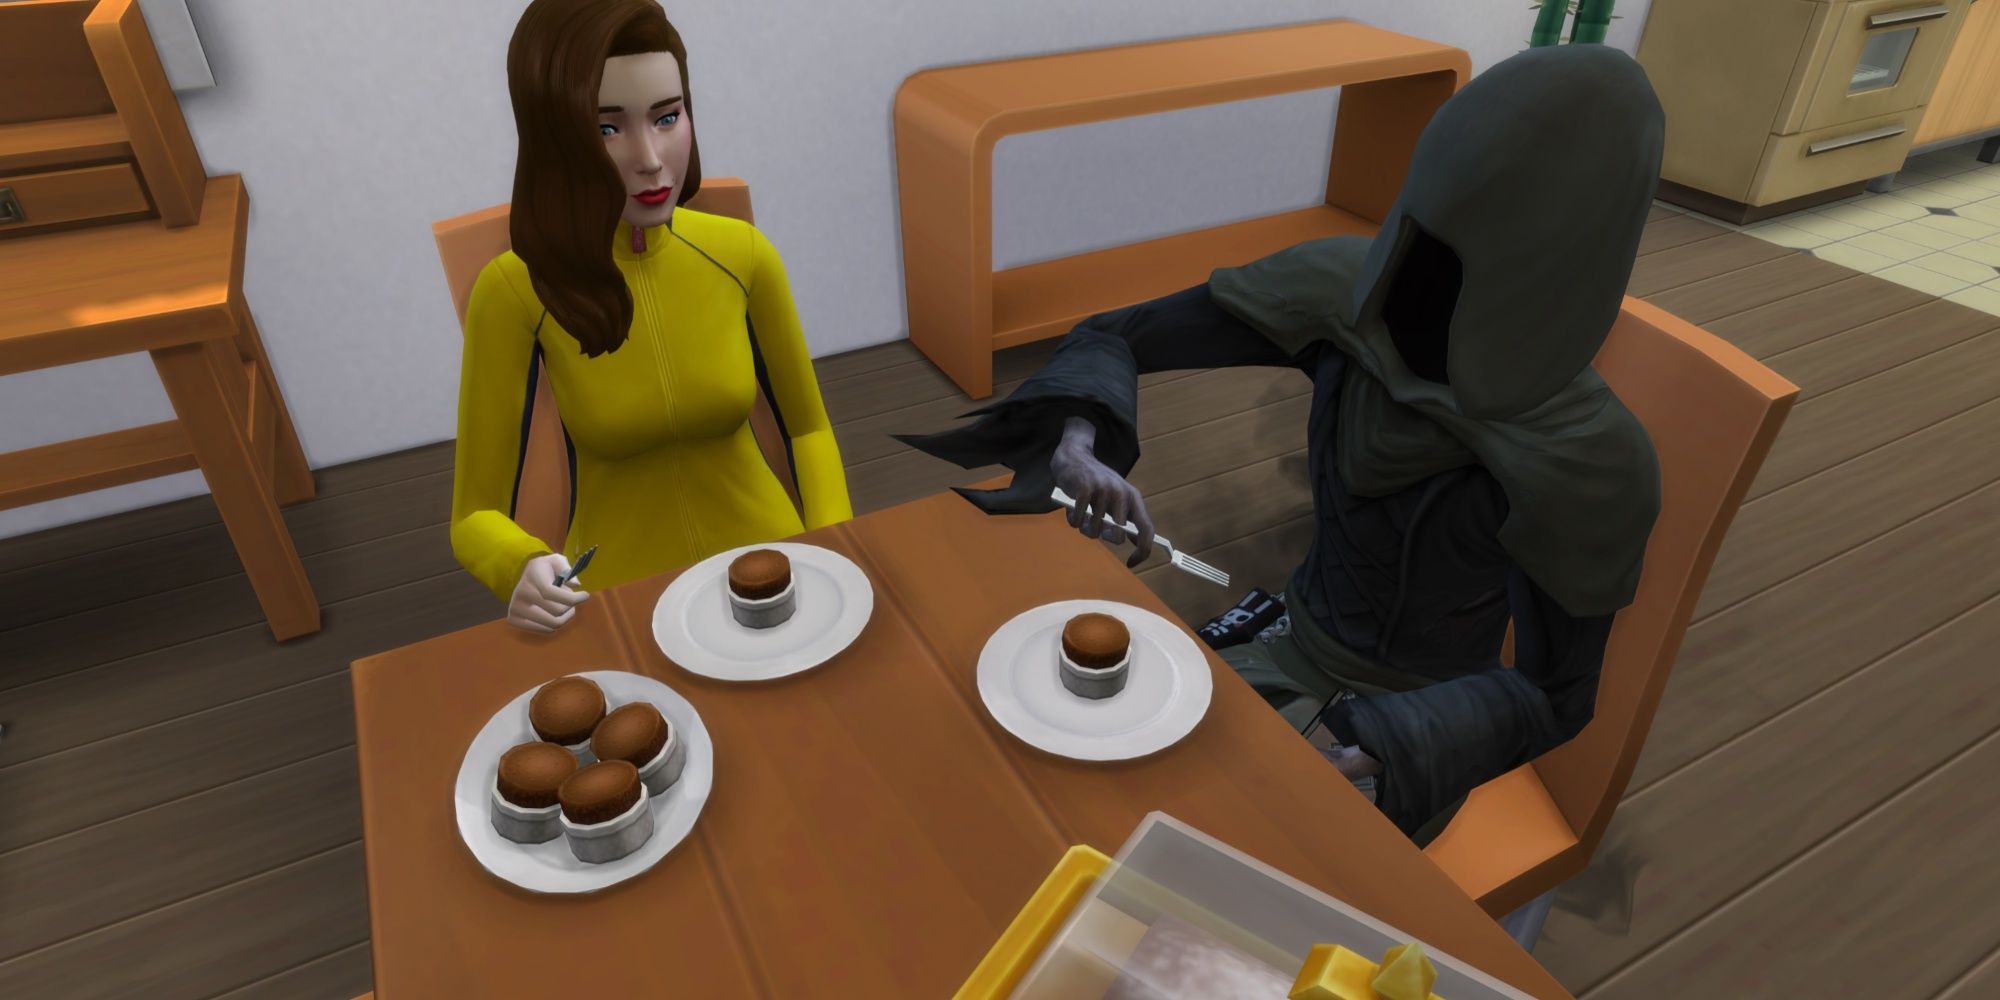 The Grim Reaper and a friendly sim eating chocolate cupcakes in The Sims 4.